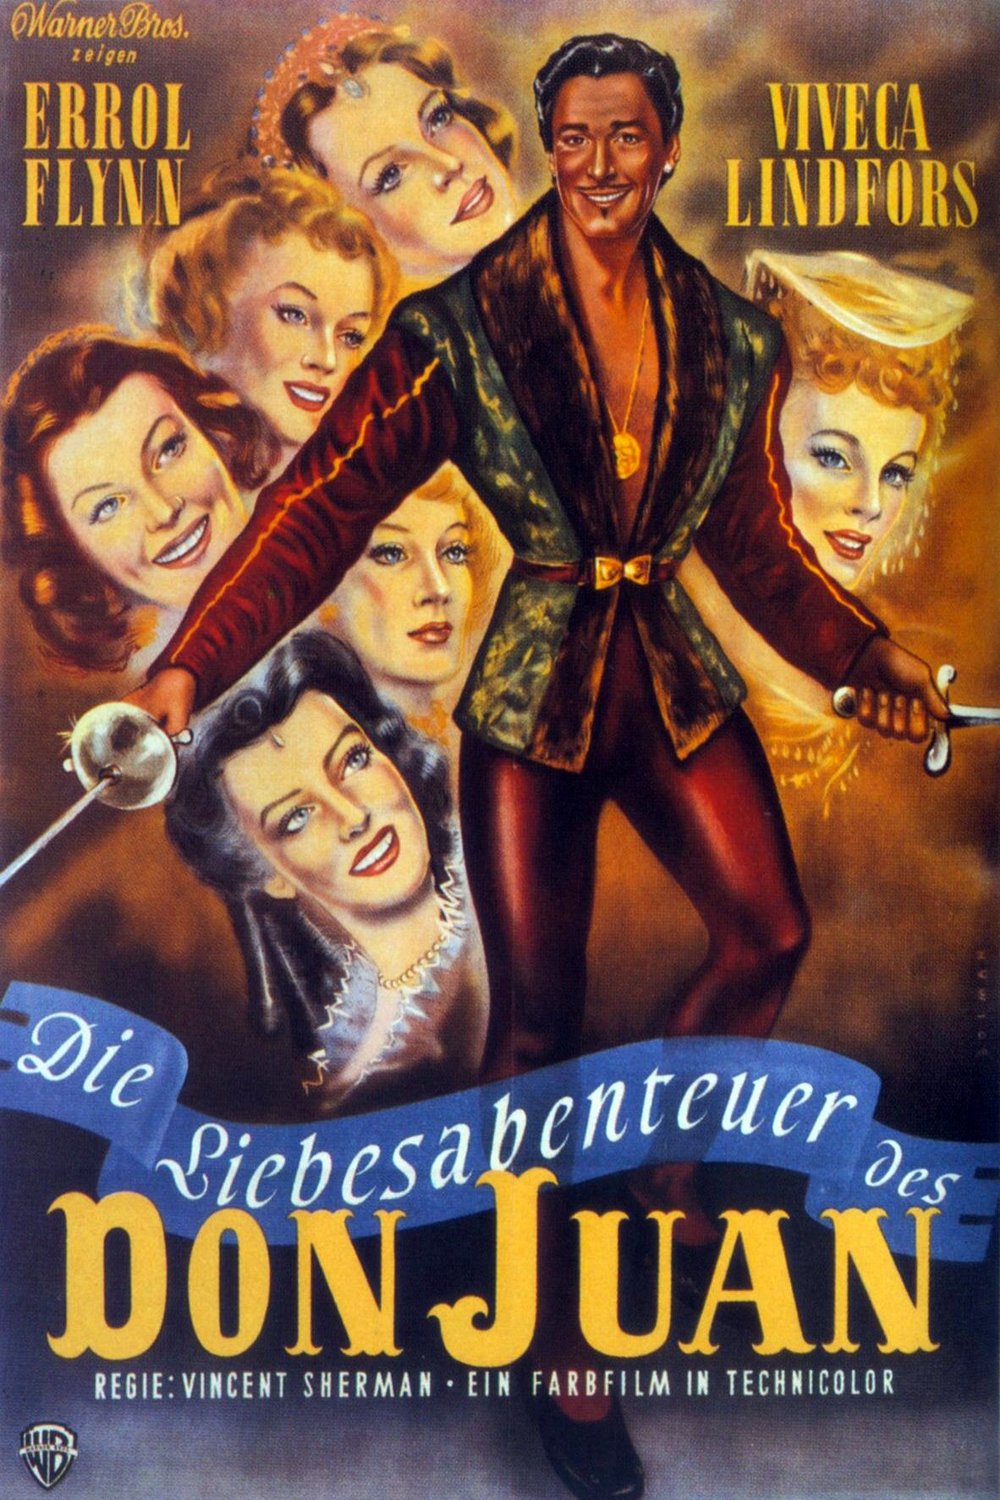 Poster of the movie Adventures of Don Juan